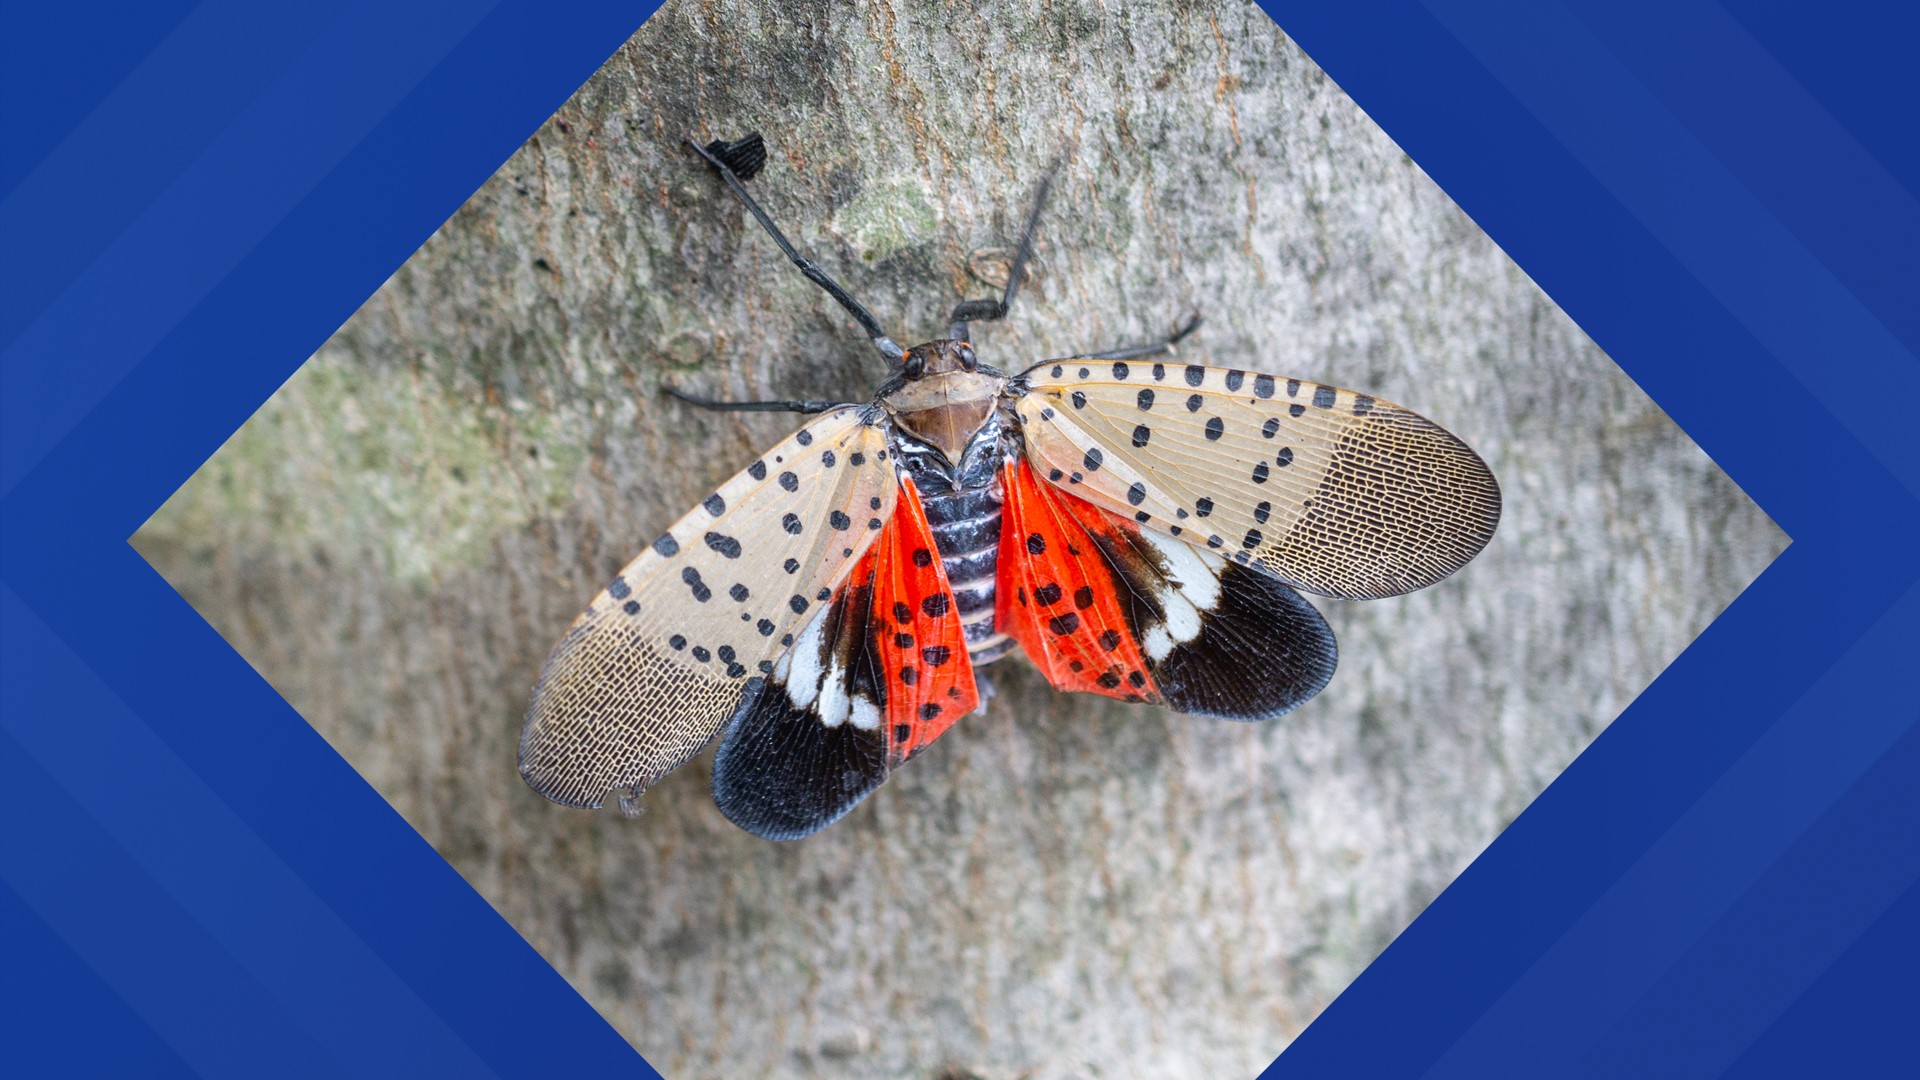 The spotted lanternfly is once again spreading in parts of Pennsylvania. Lycoming, Snyder, and Union Counties are now all listed as a quarantine zone.